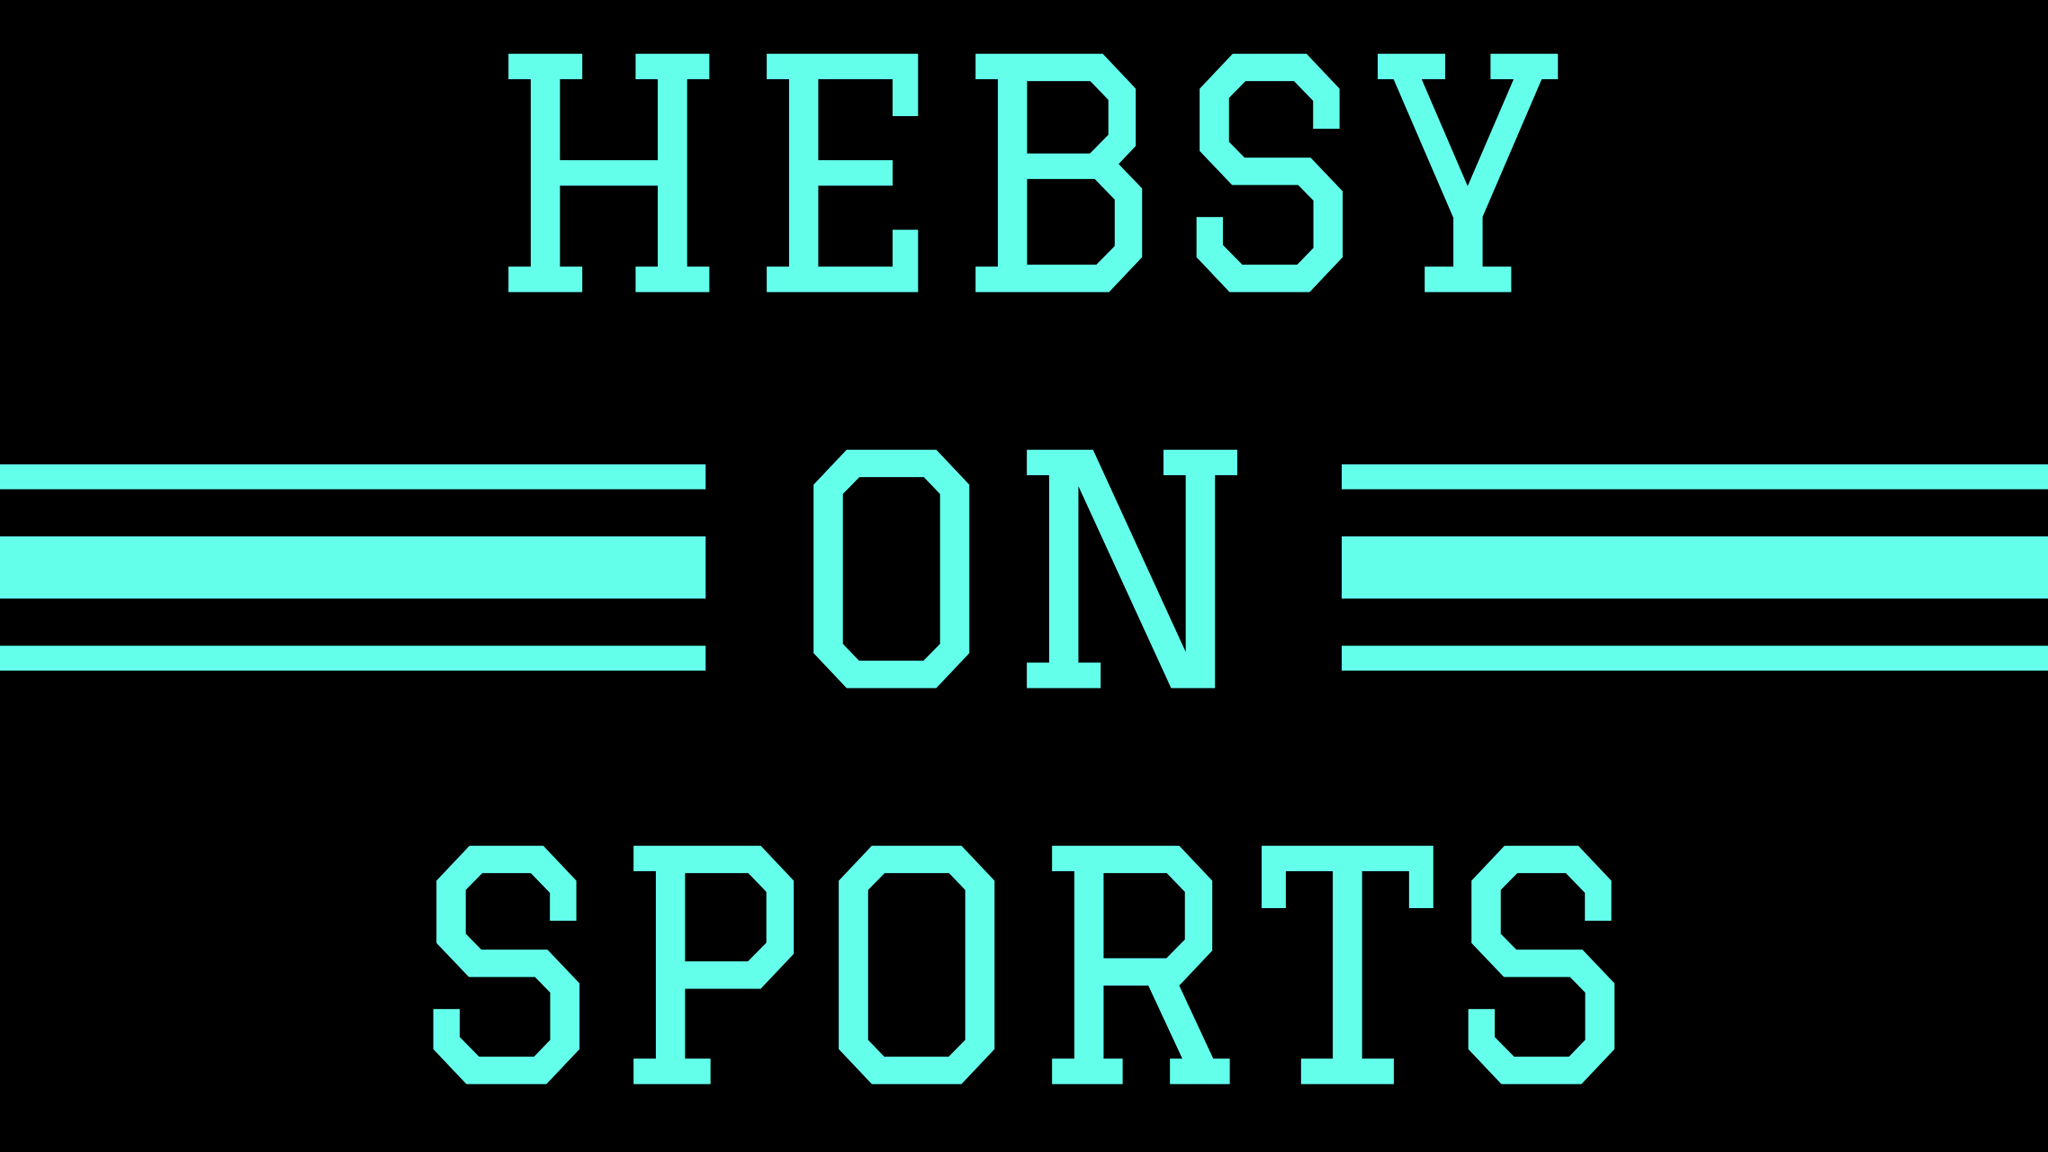 Hebsy on Sports for September 17, 2021